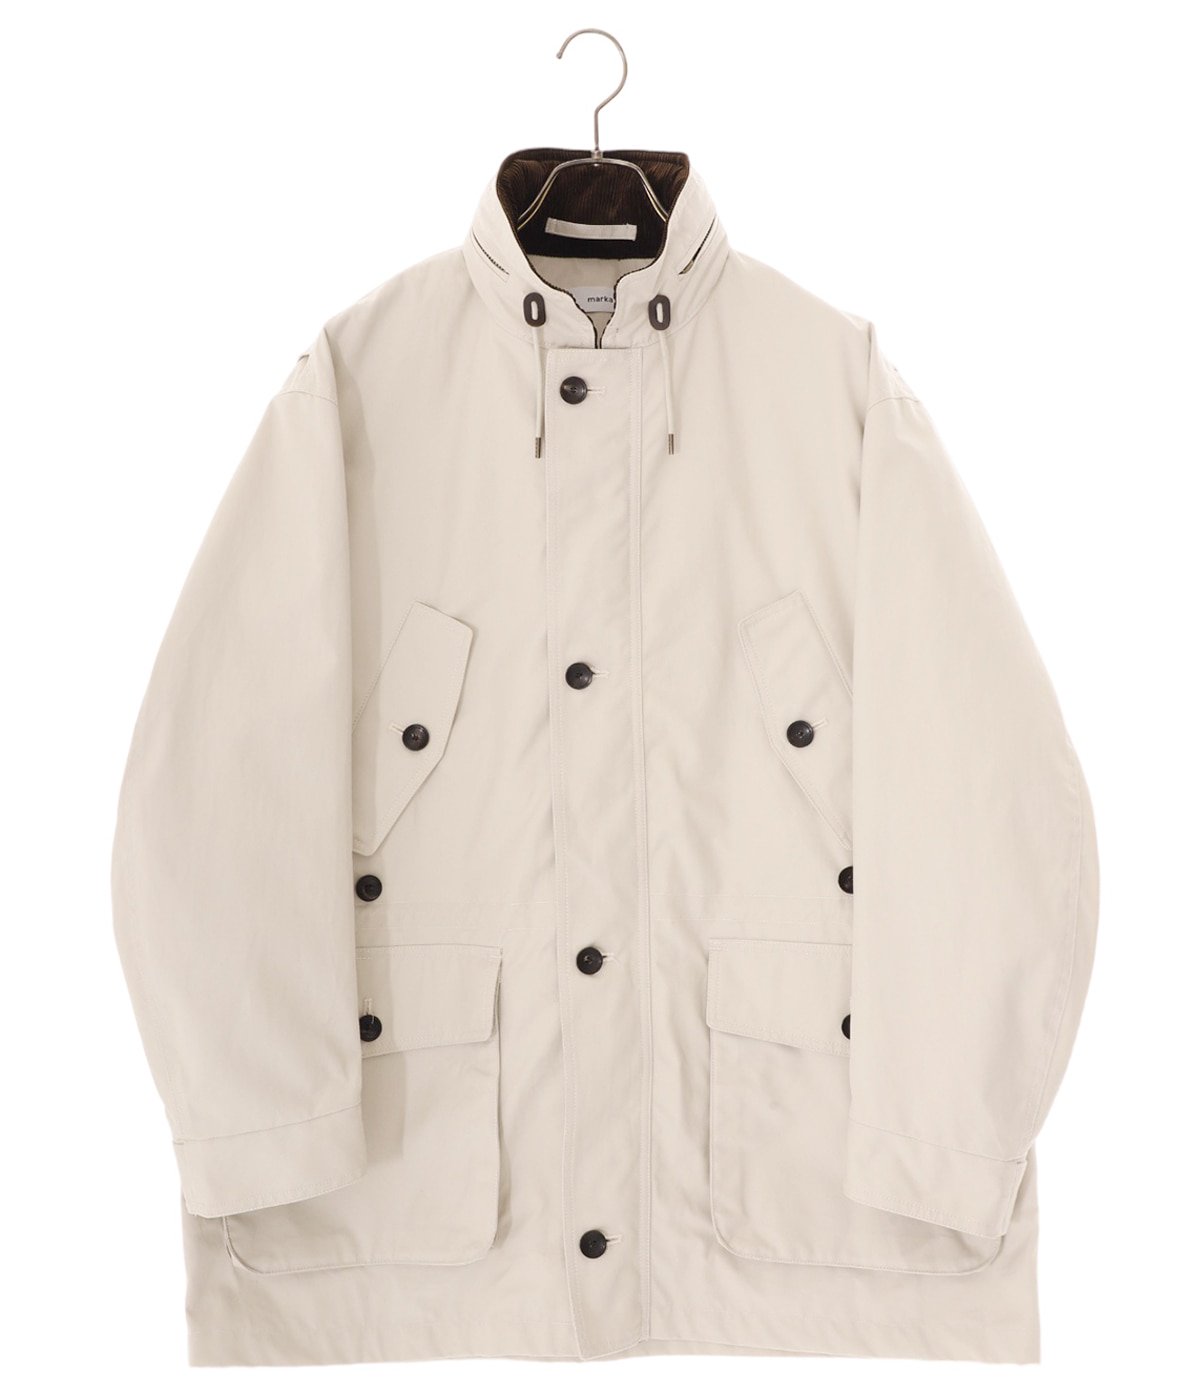 OUTDOORMAN JACKET - organic cotton weather cloth -